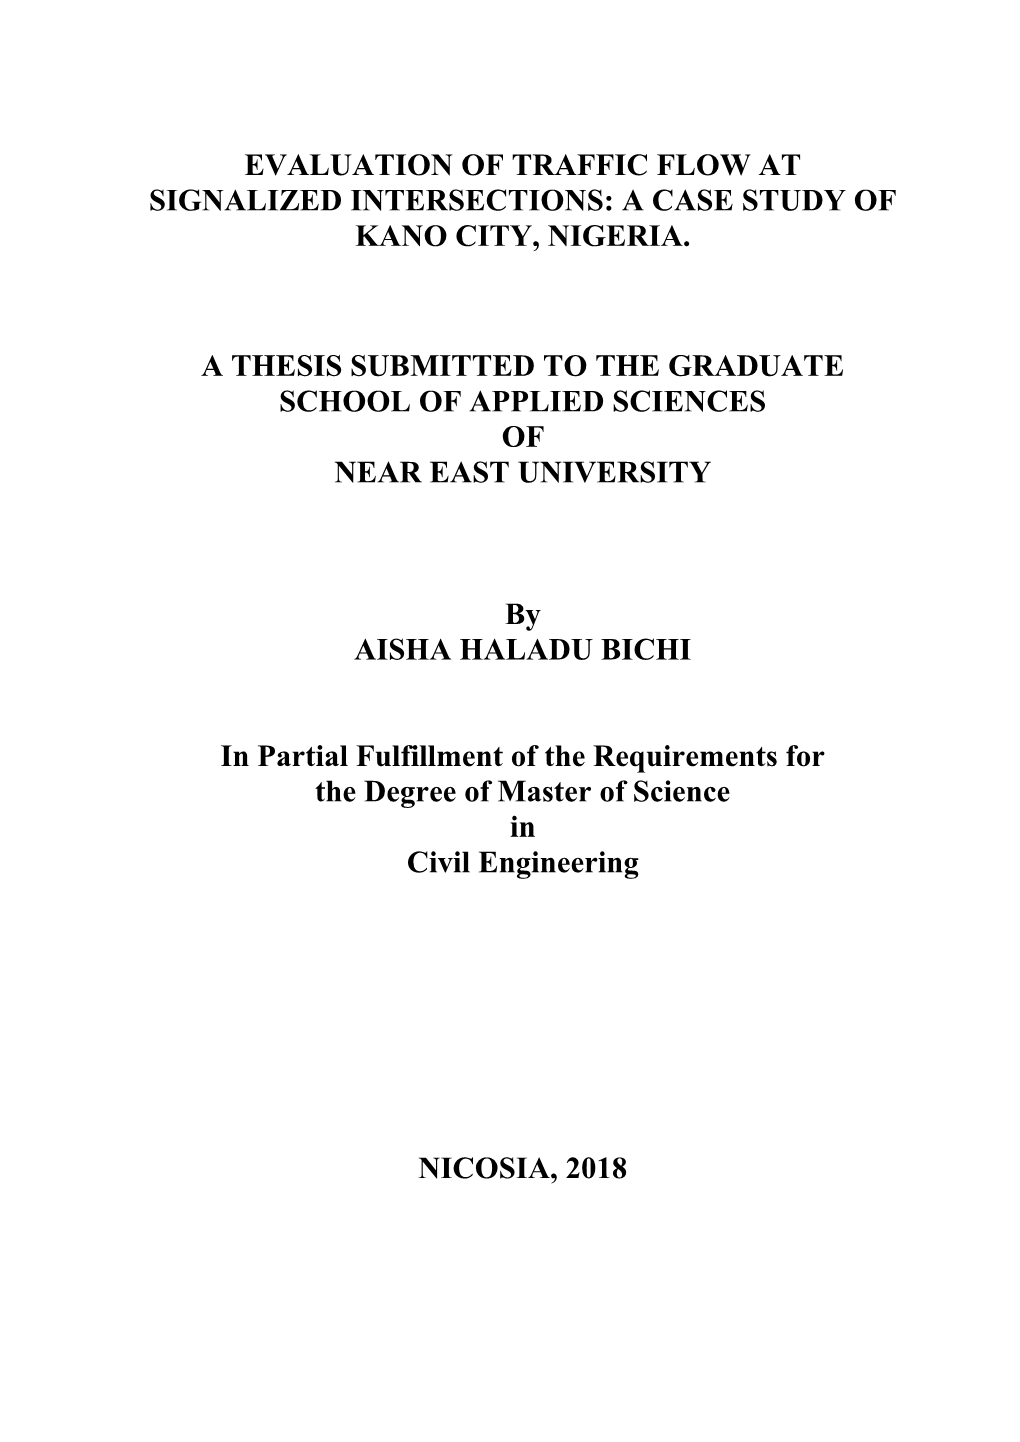 Evaluation of Traffic Flow at Signalized Intersections: a Case Study of Kano City, Nigeria